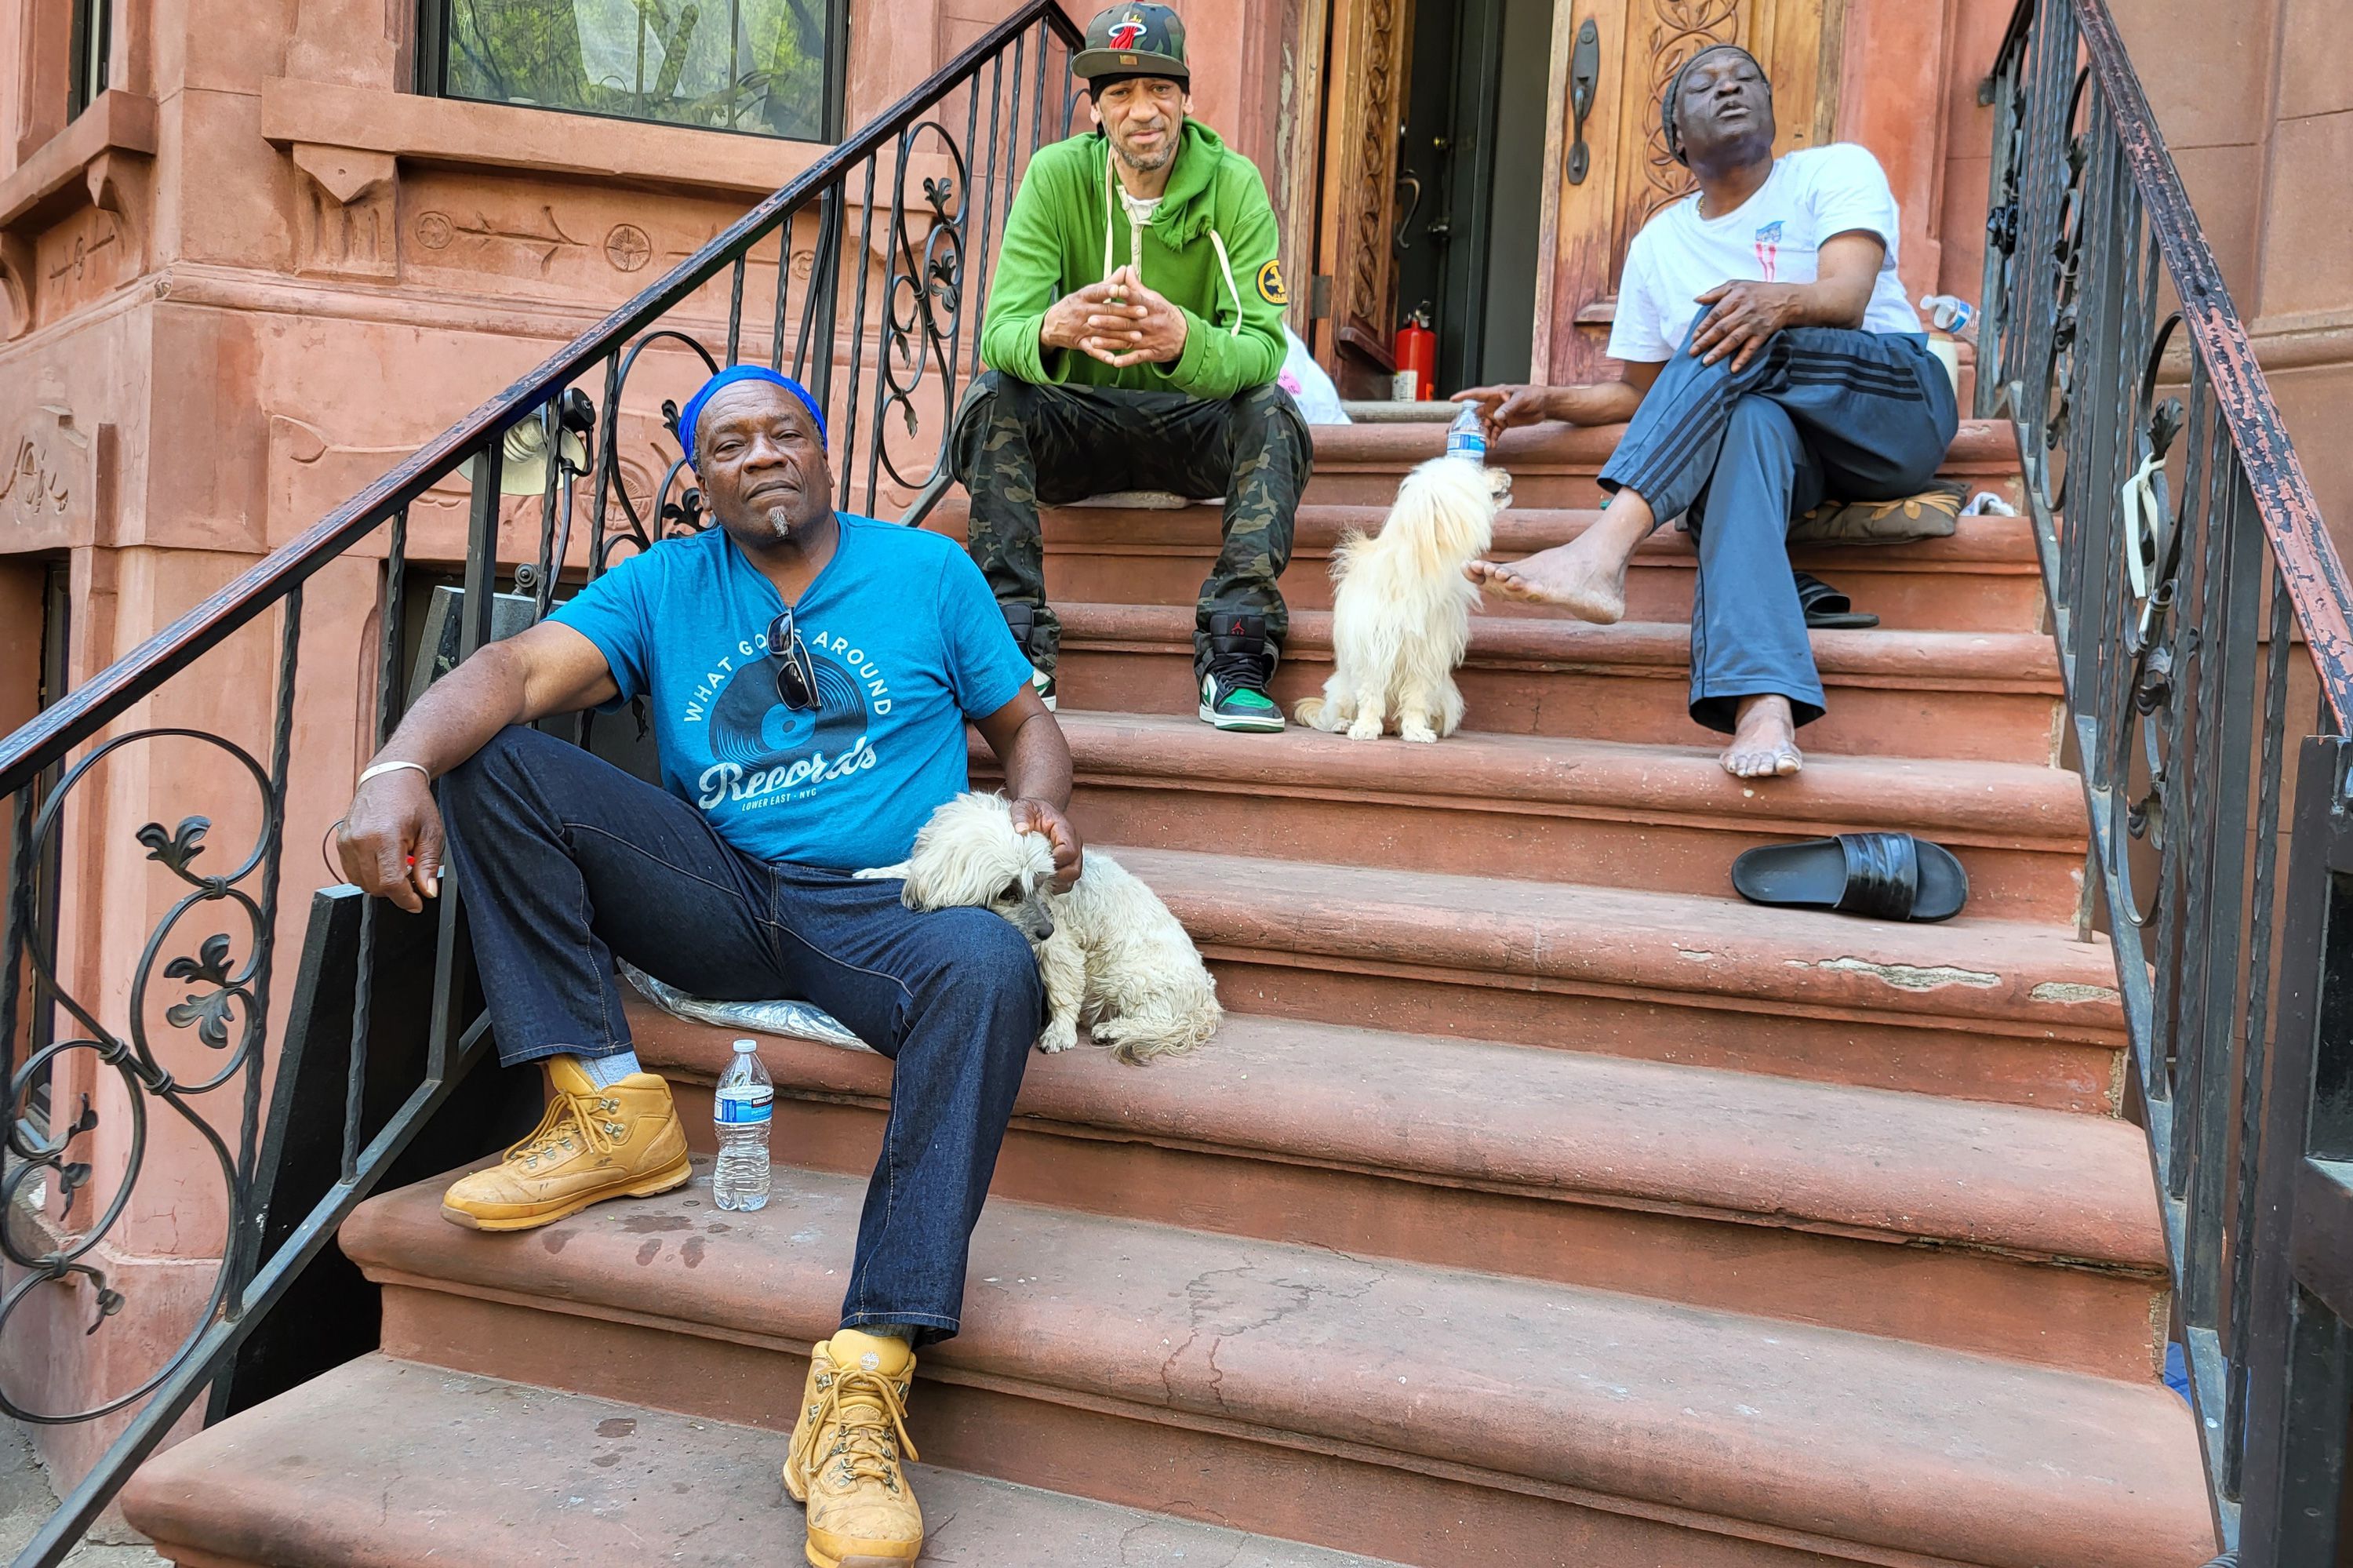 Harlem residents Keith Woody, Alstin Francis and former neighbor, Rickey Colbourne, sit on a Brownstone stoop next to the Langston Hughes House.